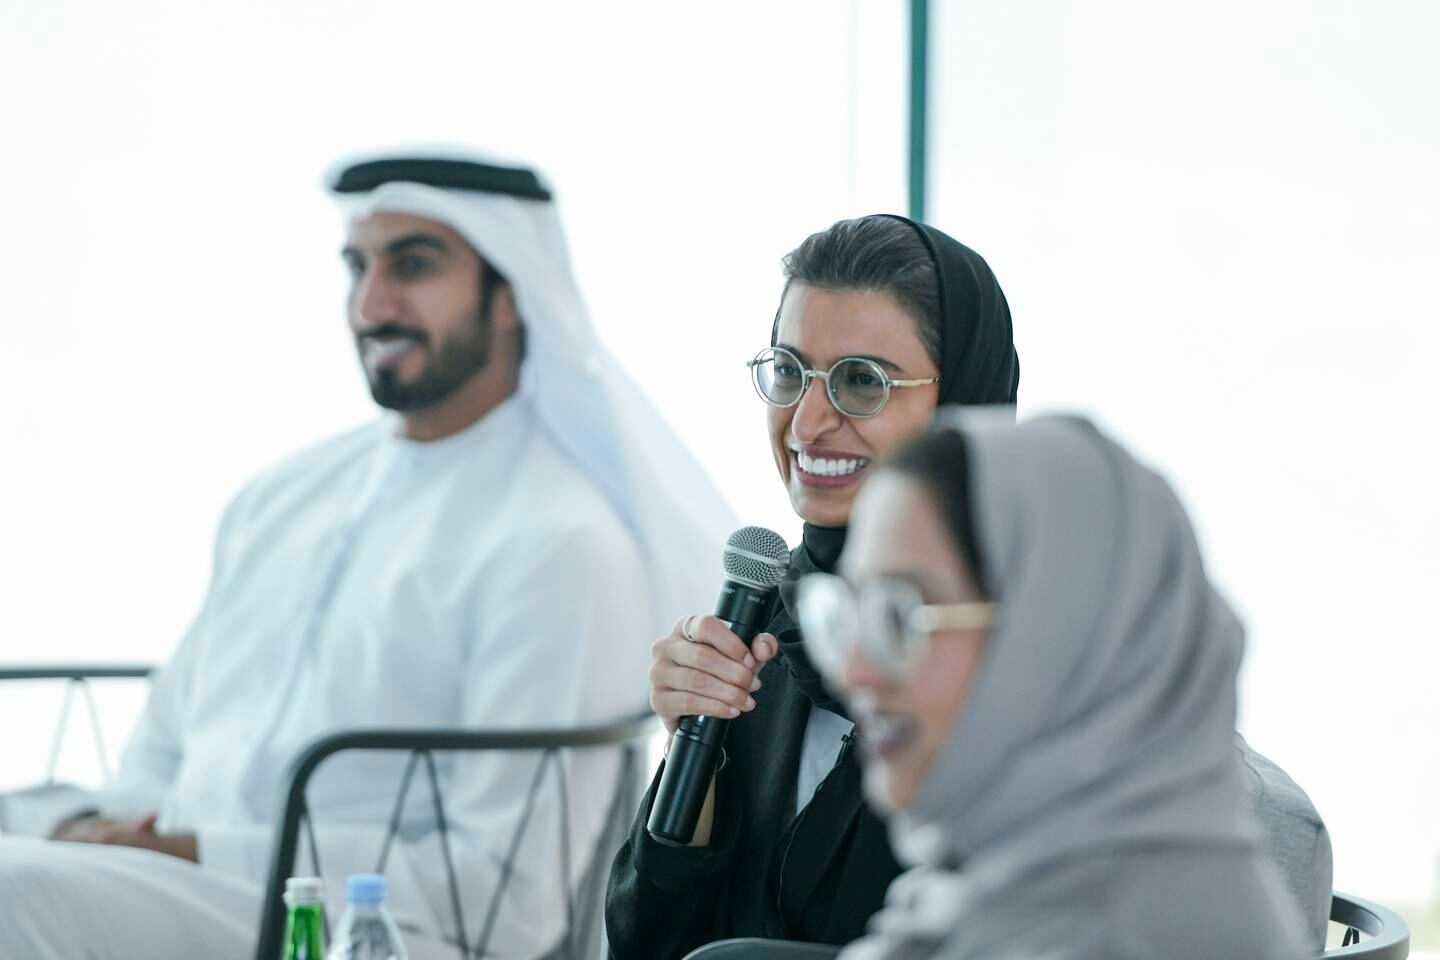 Noura Al Kaabi, Minister of Culture and Youth, says the participation of a group of UAE creatives, including both Emirati and resident artists, at the Smithsonian Folklife Festival 'reflects the rich heritage of our country'. Khushnum Bhandari / The National 

